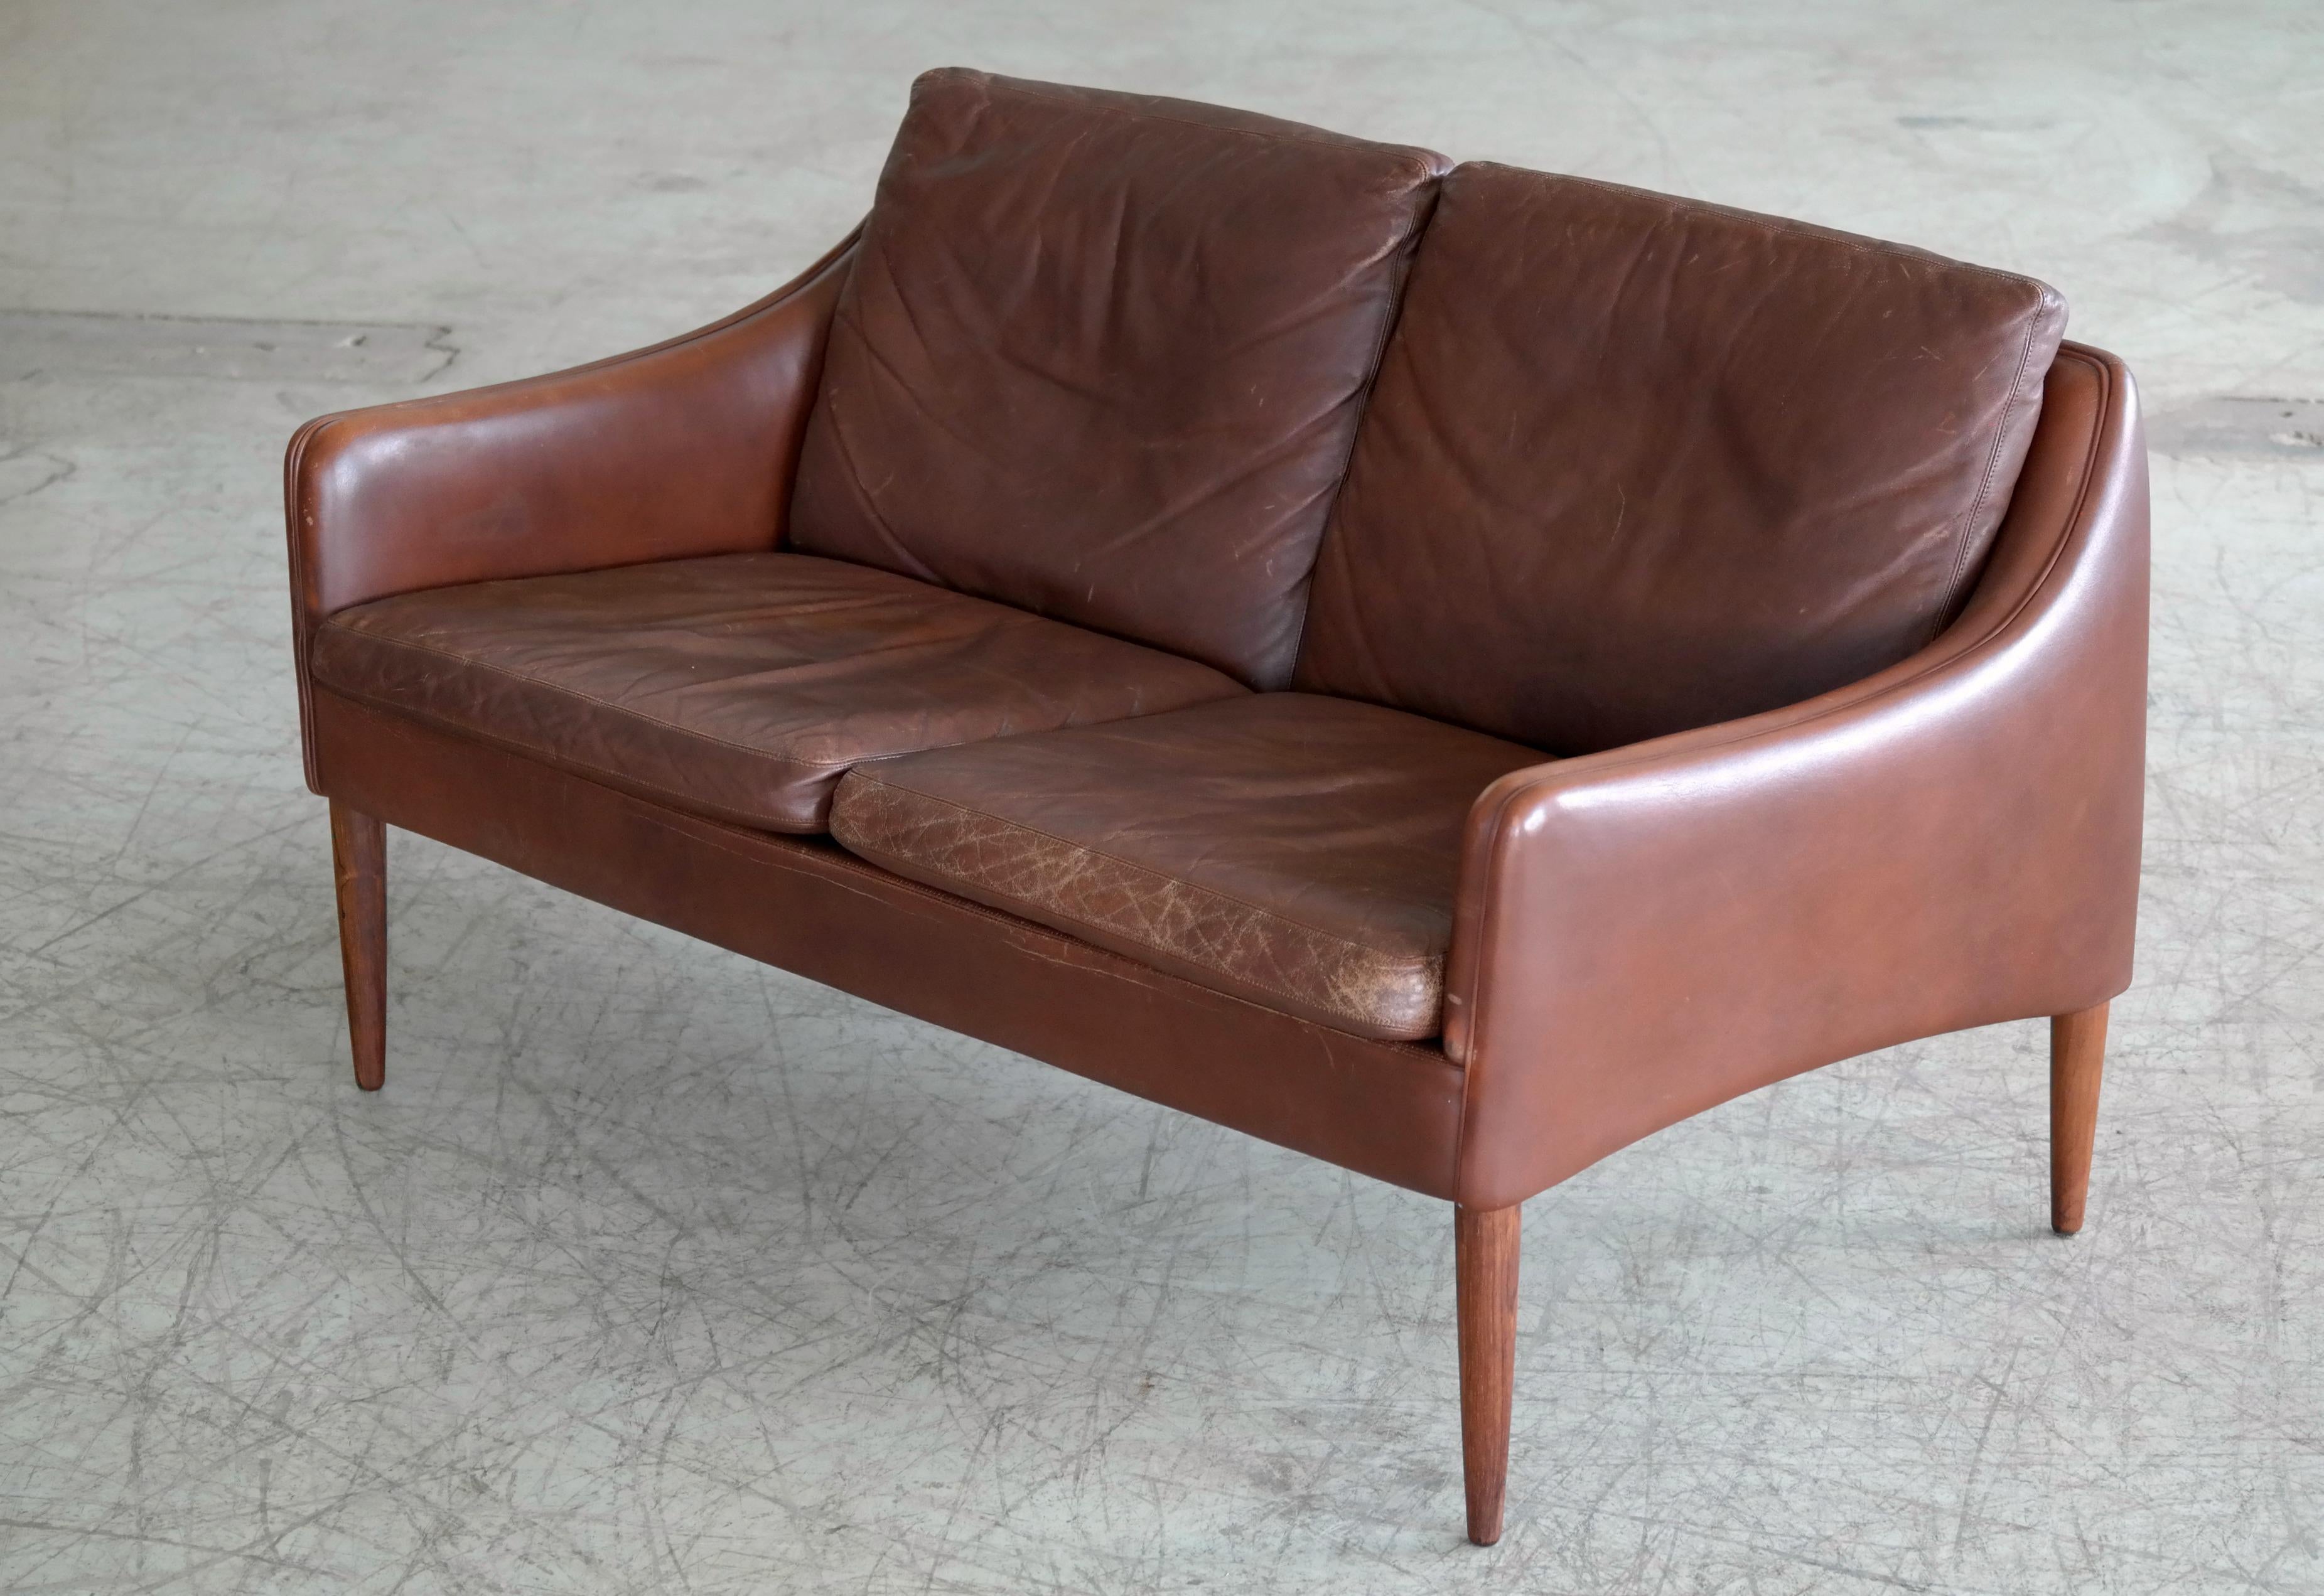 Mid-20th Century Danish Hans Olsen Settee or Loveseat in Chocolate Brown Leather and Rosewood 